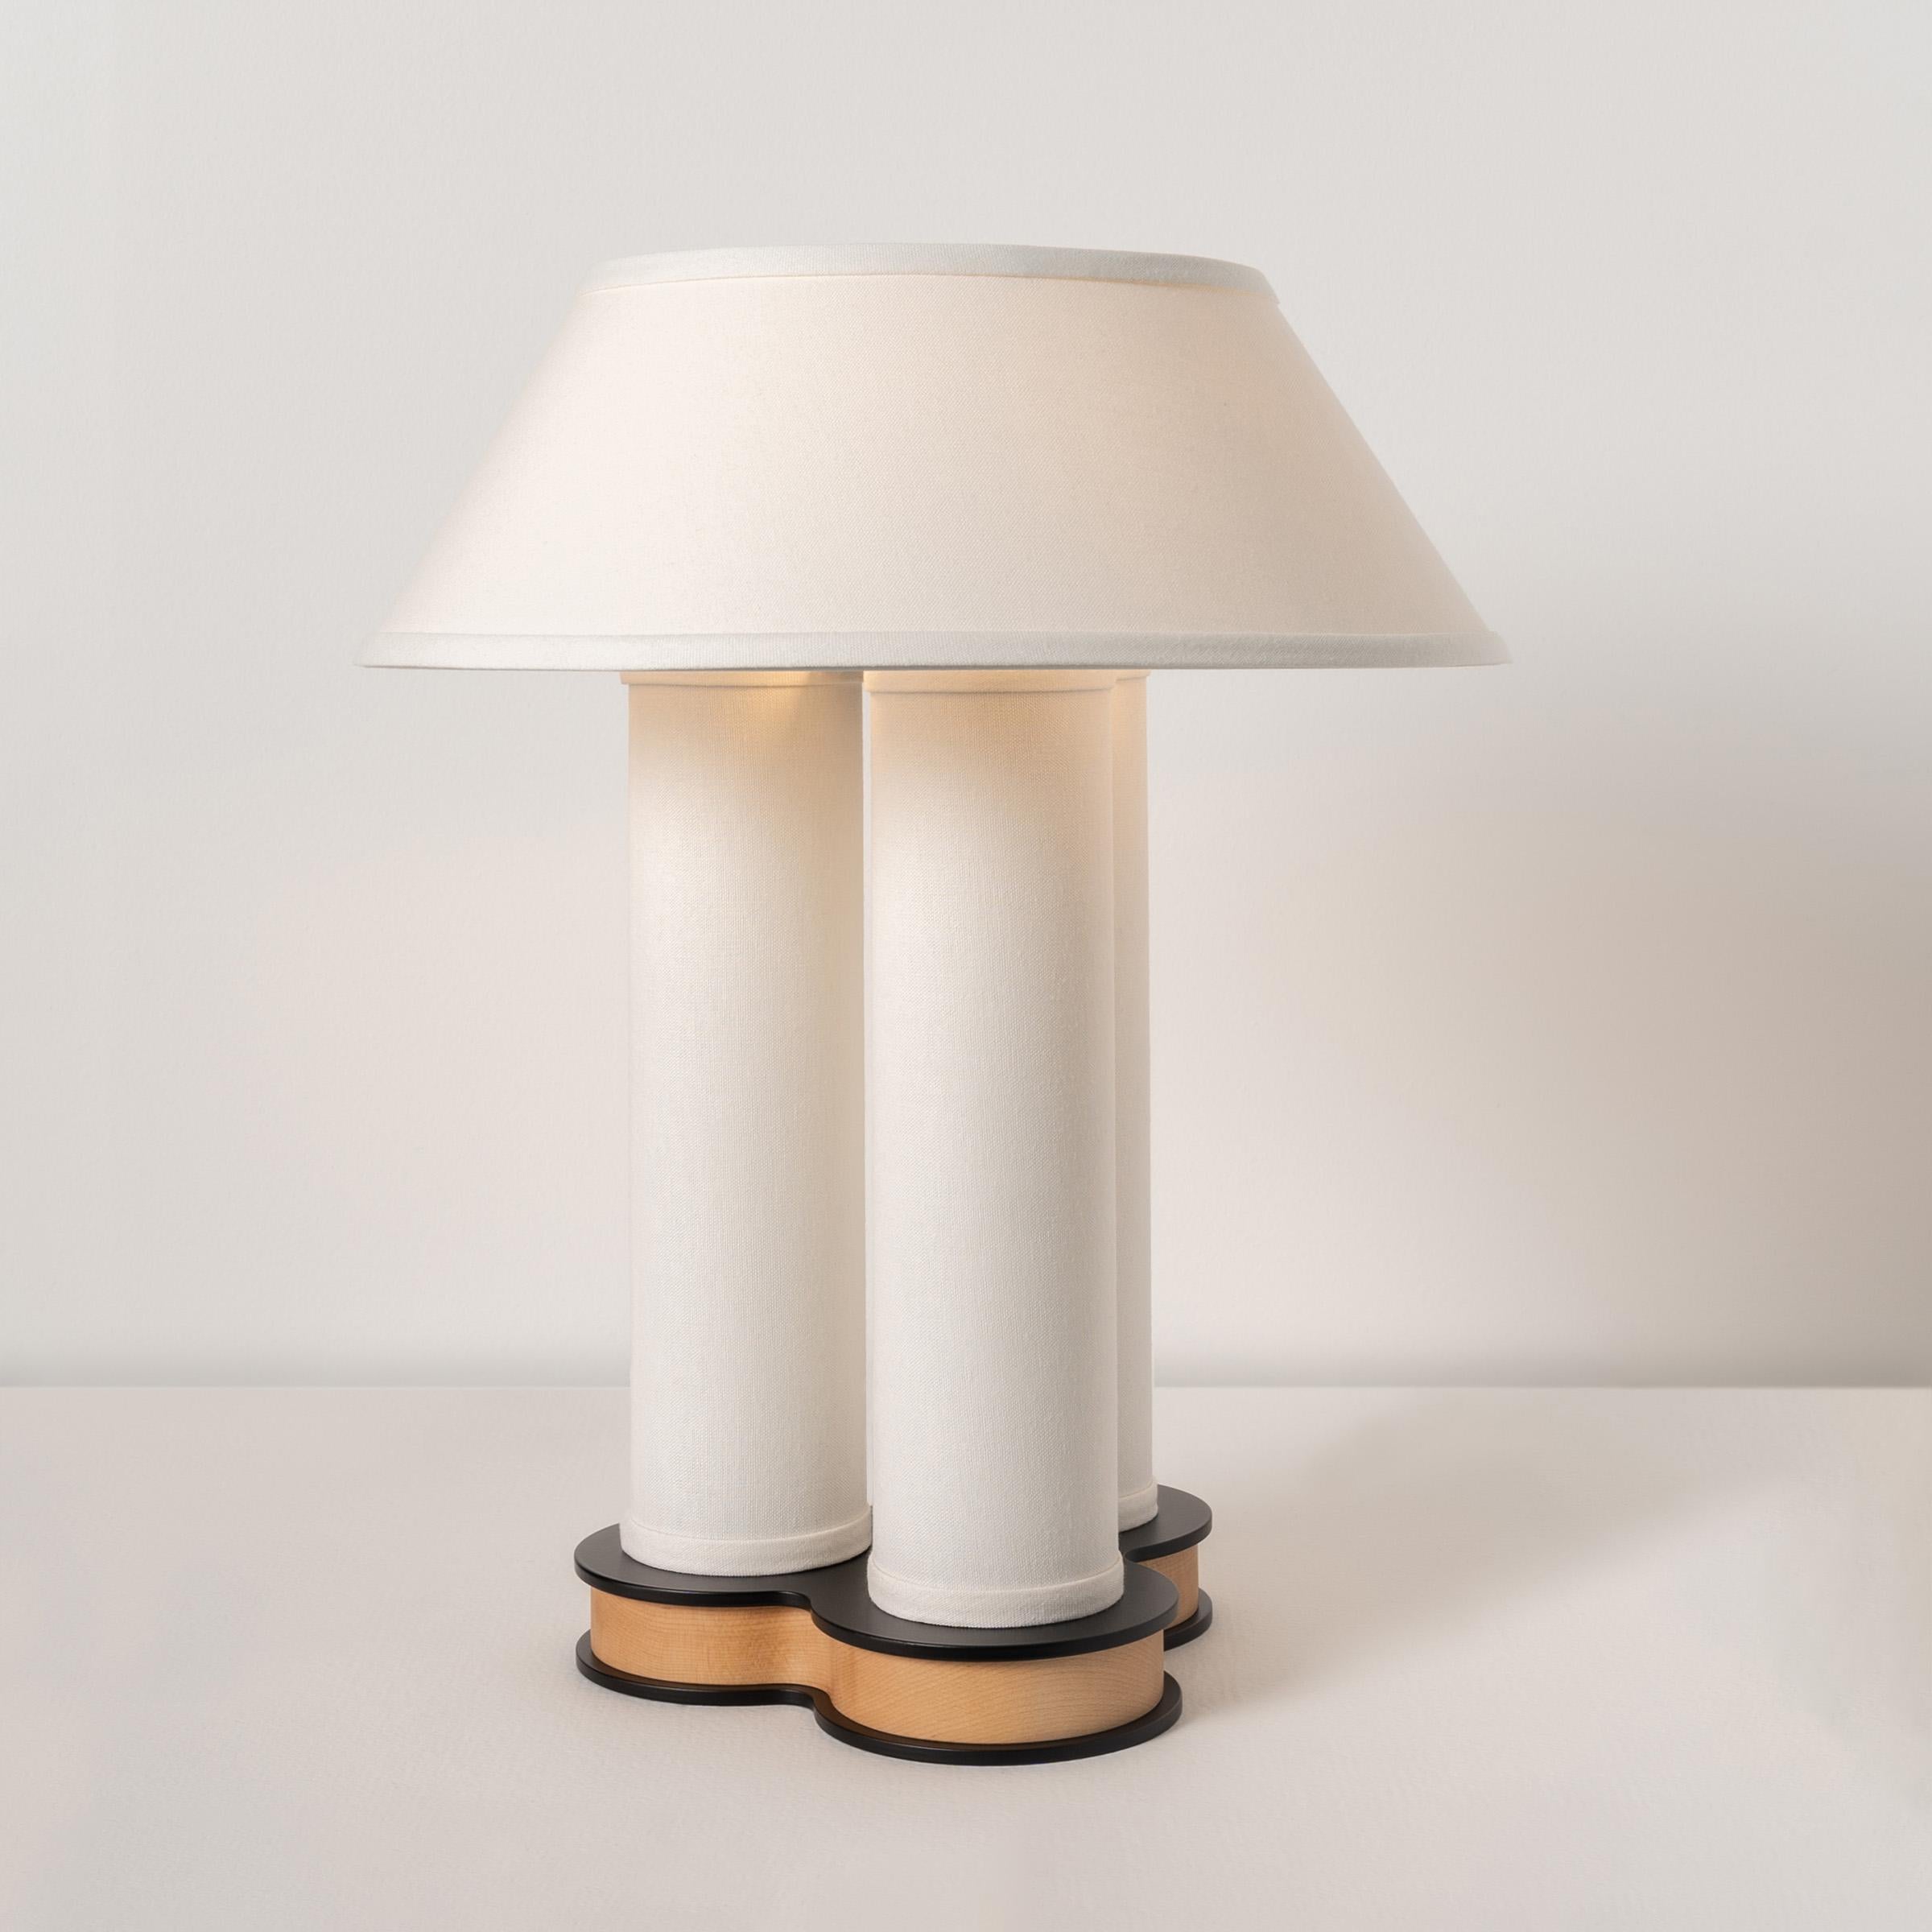 Pillaret Trio 18in Table Lamp by Studio Dunn For Sale 2